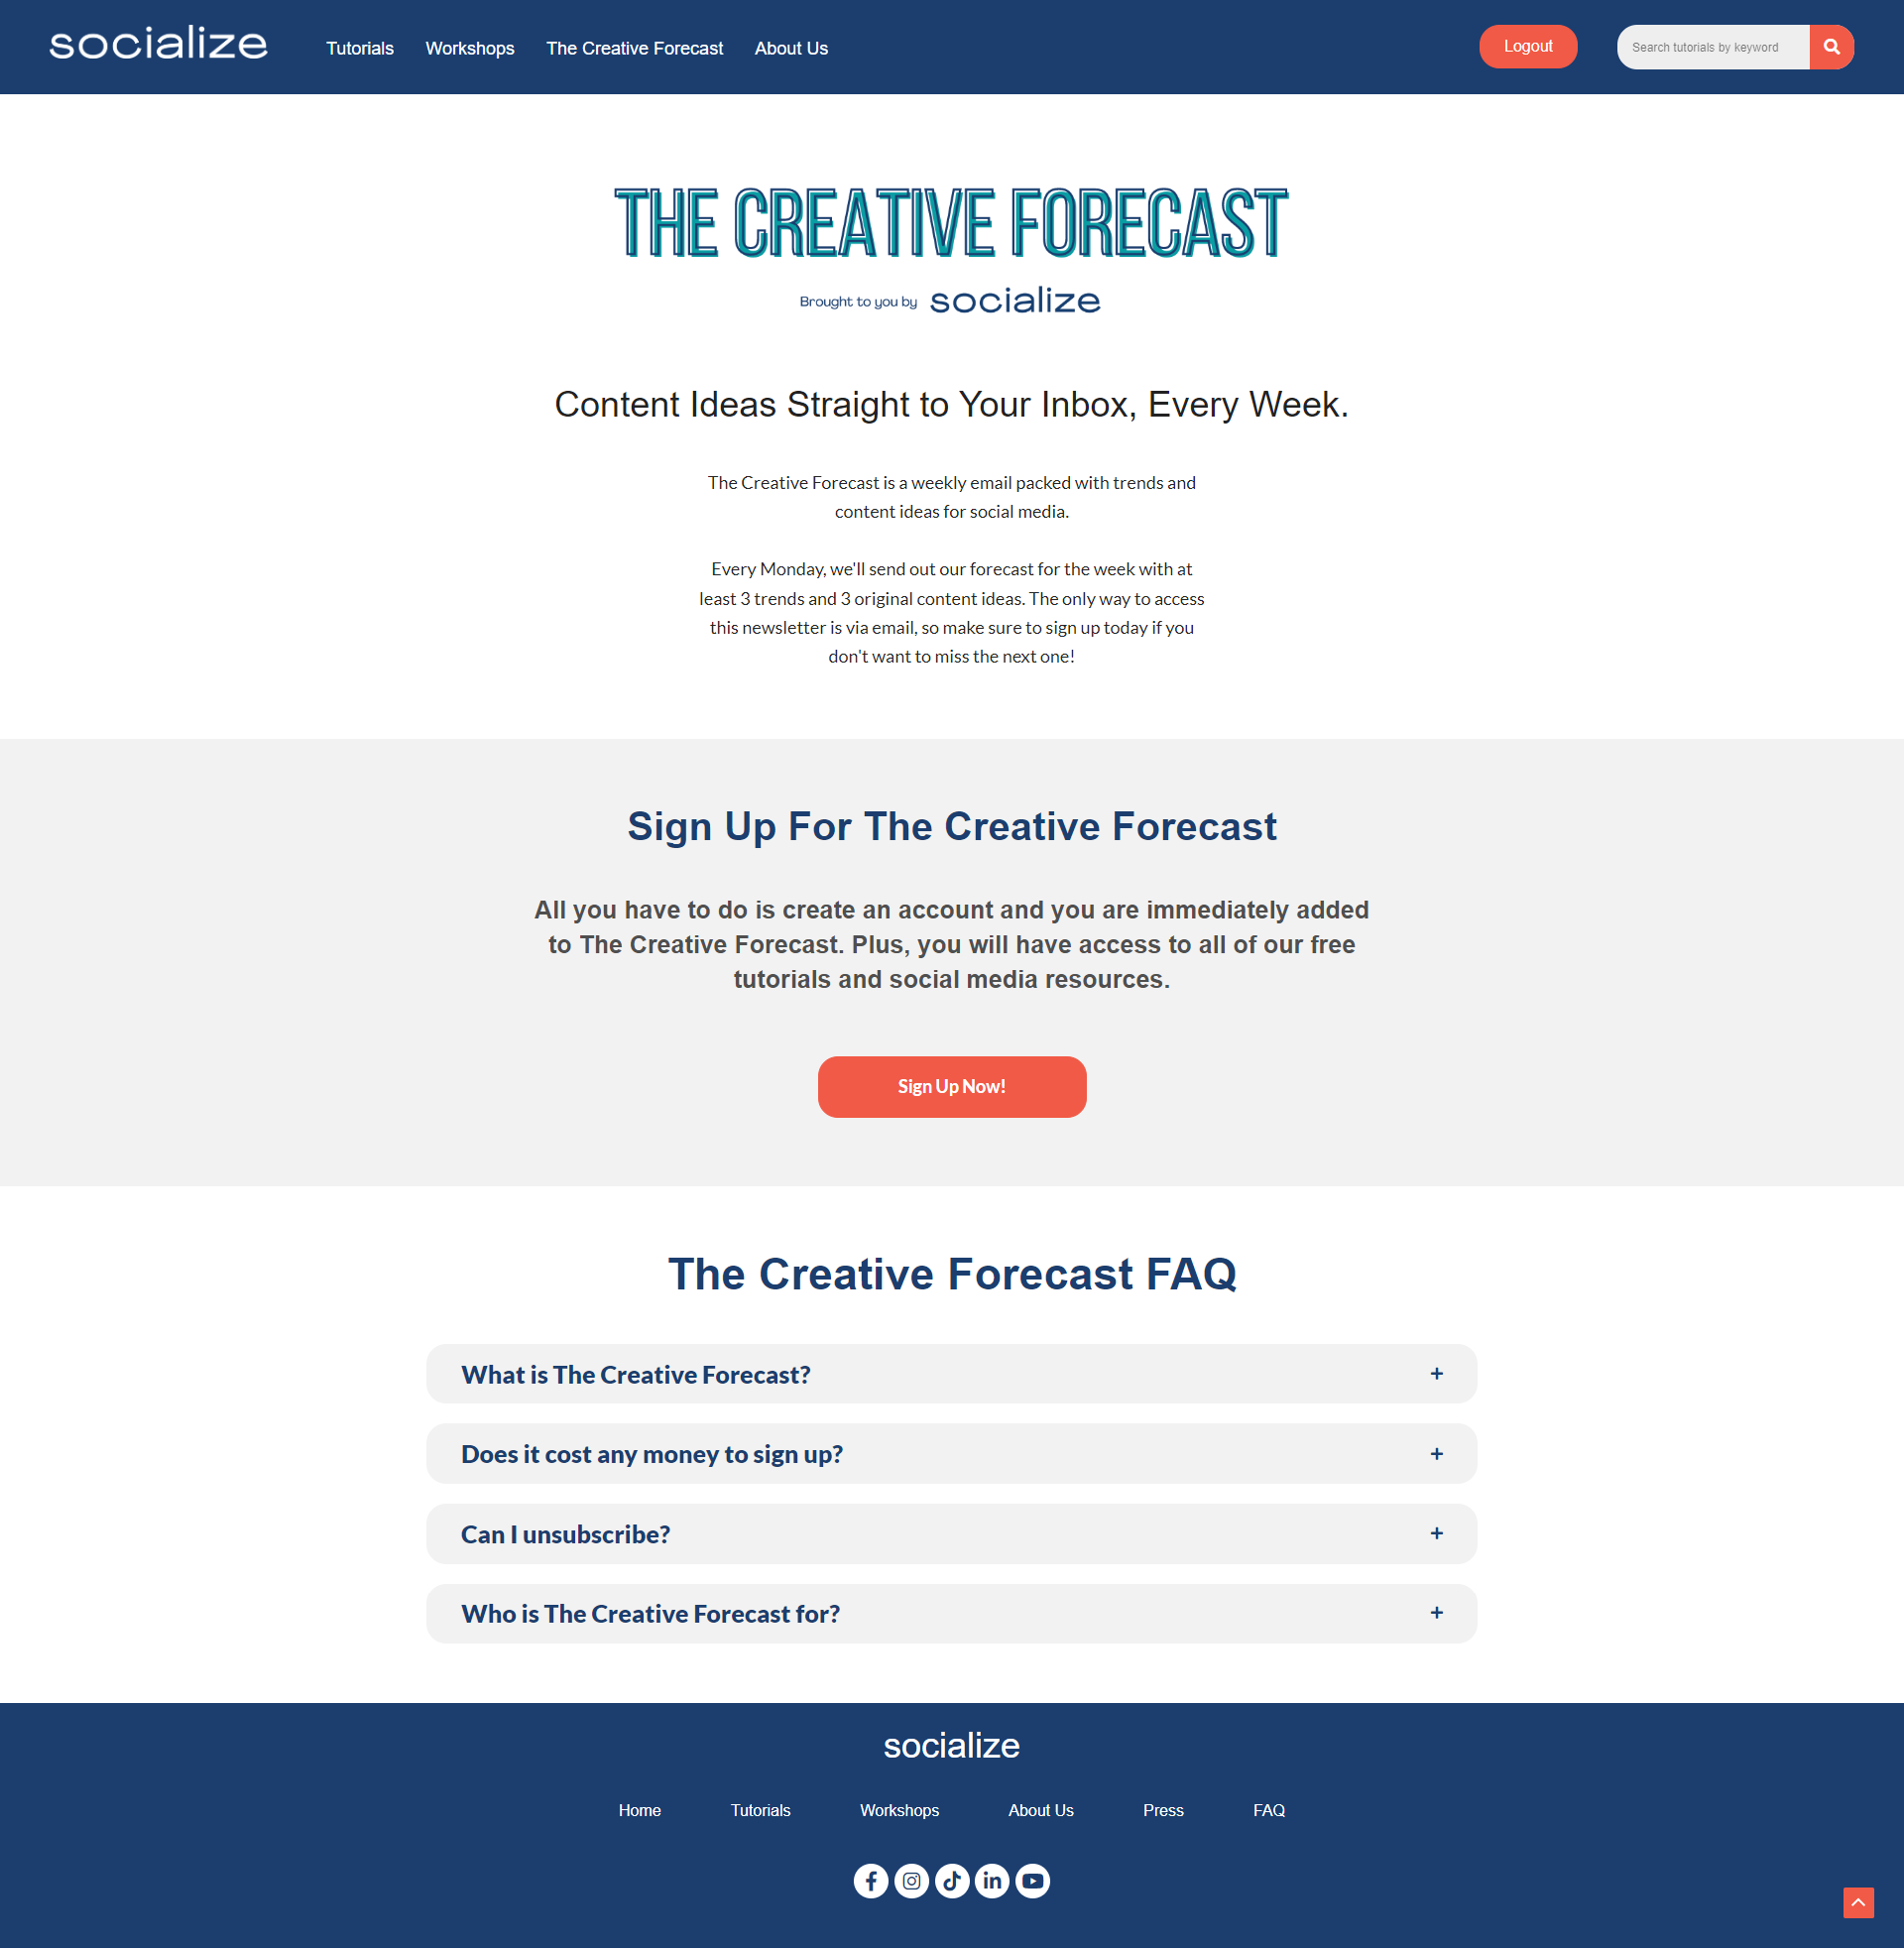 the creative forecasts page of hellosocialize.com